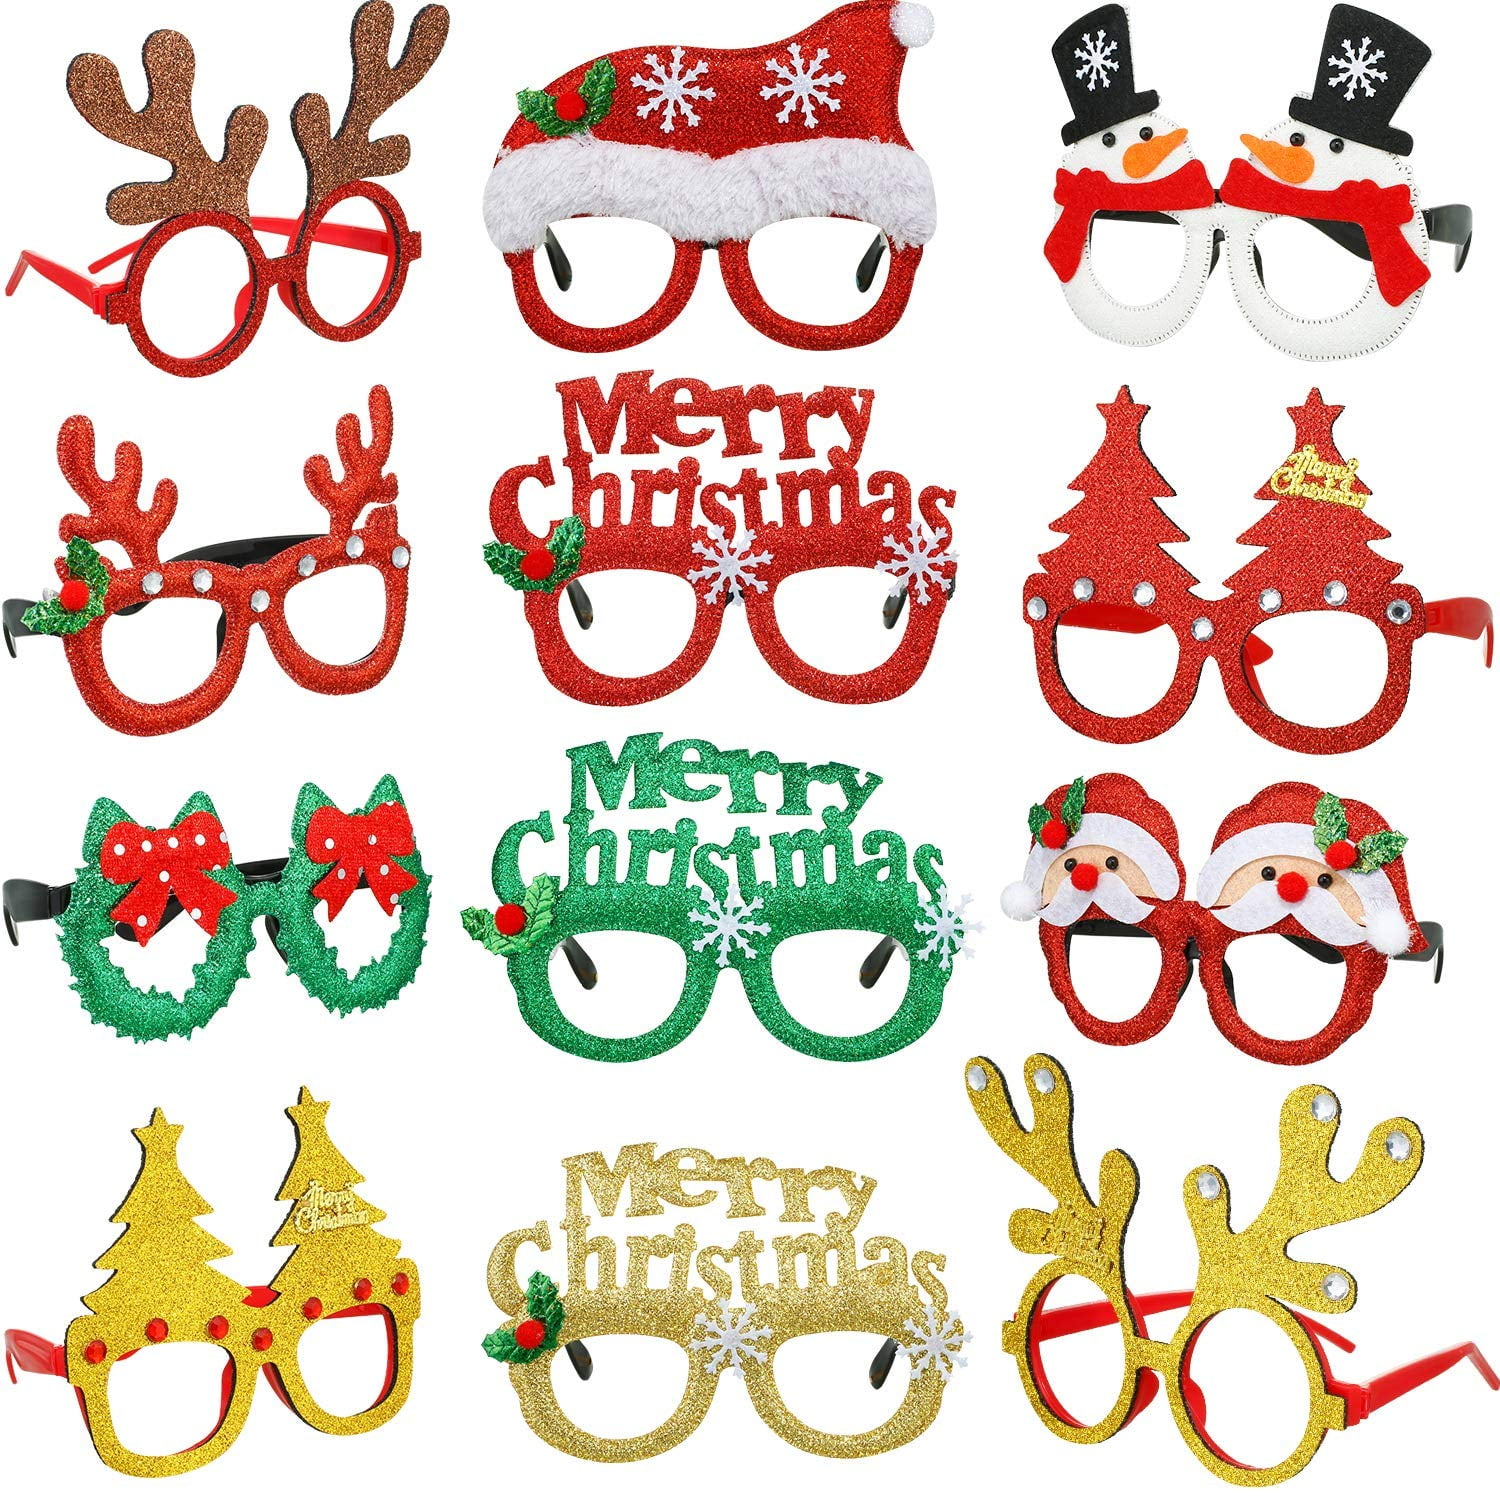 Glasses New Year Novelty Decorative Gifts Favors for 2020 Christmas Cosplay 1PCS 